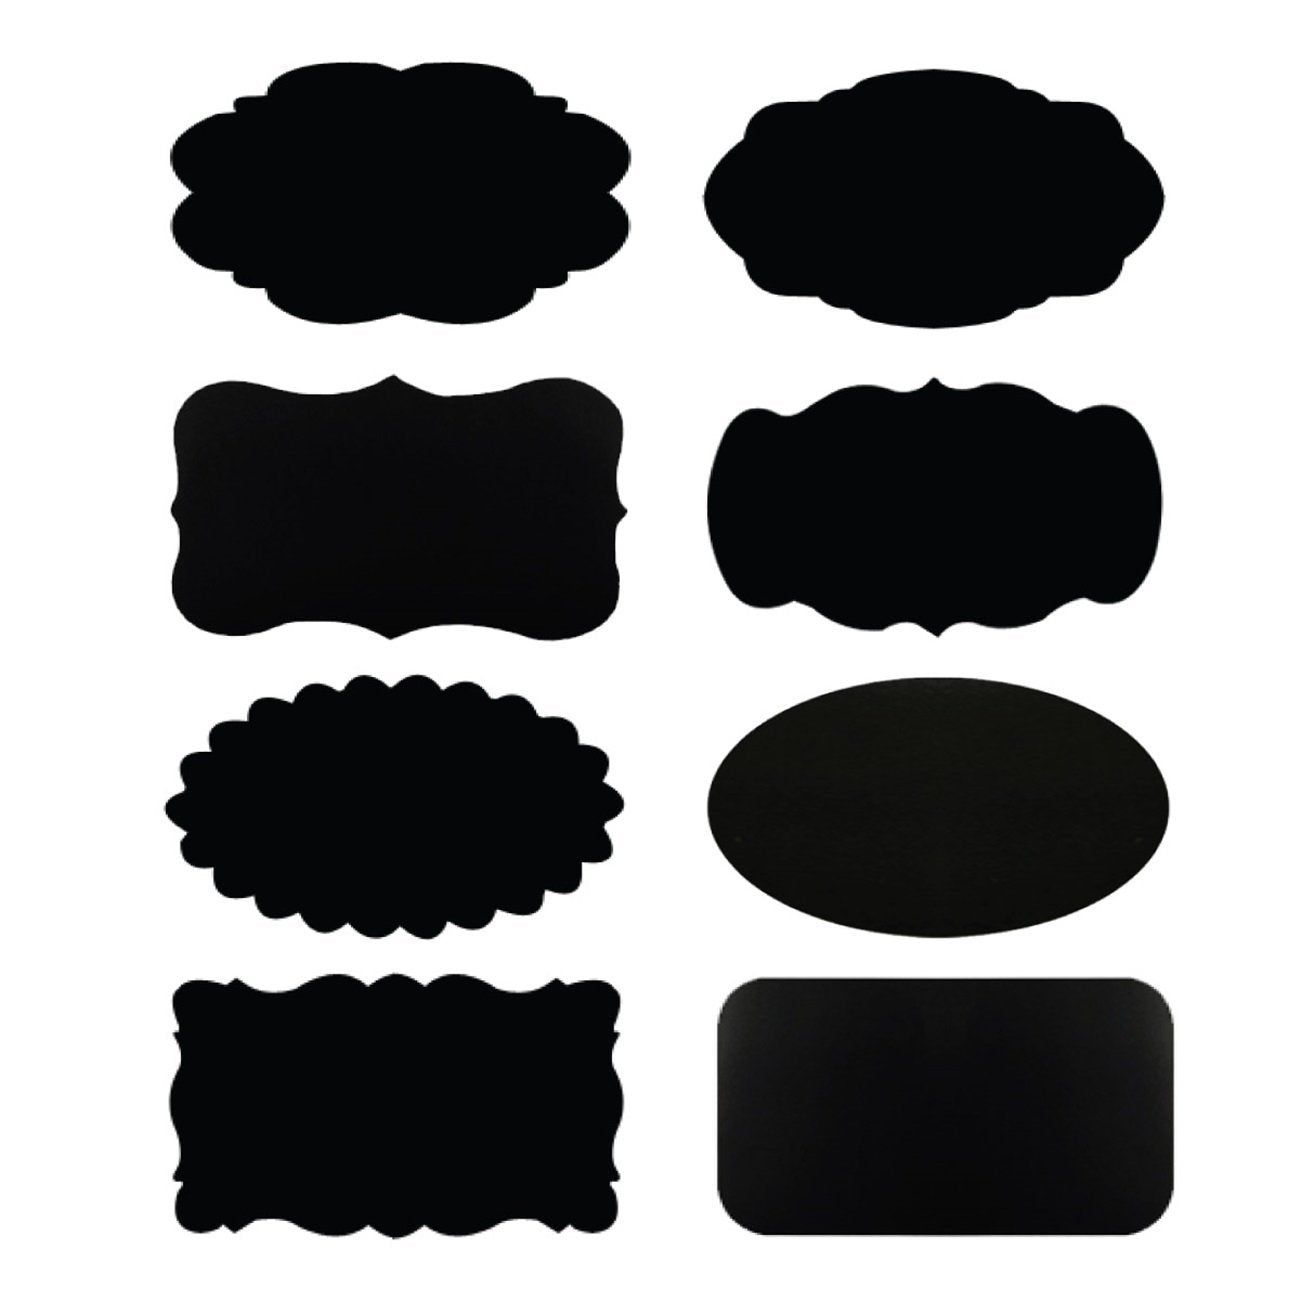 Wrapables Set of 64 Chalkboard Labels / Chalkboard Stickers - 2.5" x 1.5" (Set of 32) and 2 " x 1.25 " (Set of 32)